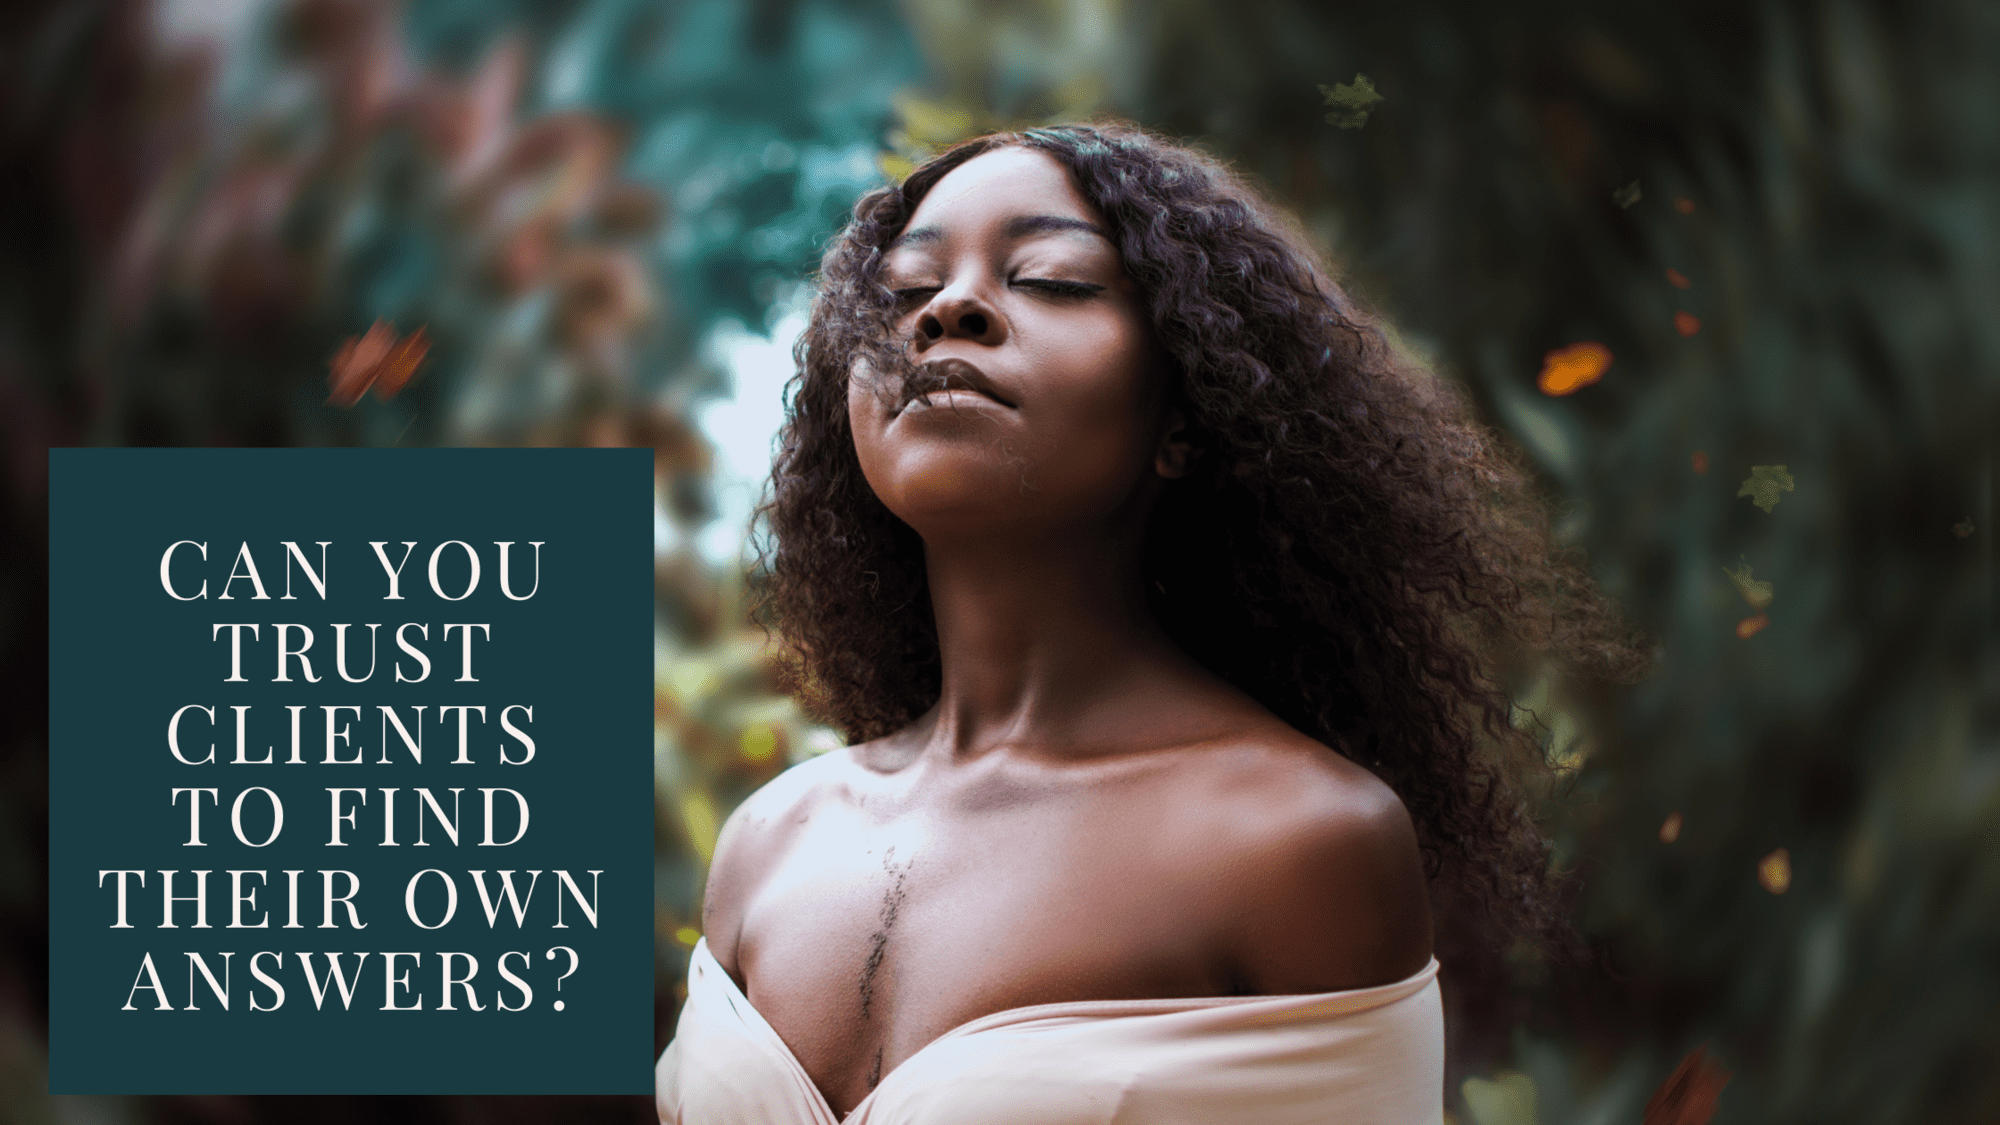 Can you trust clients to find their won answers. Young coloured woman in beige off-shoulder dress surrounded by nature. Photo Photo by Diana Simumpande